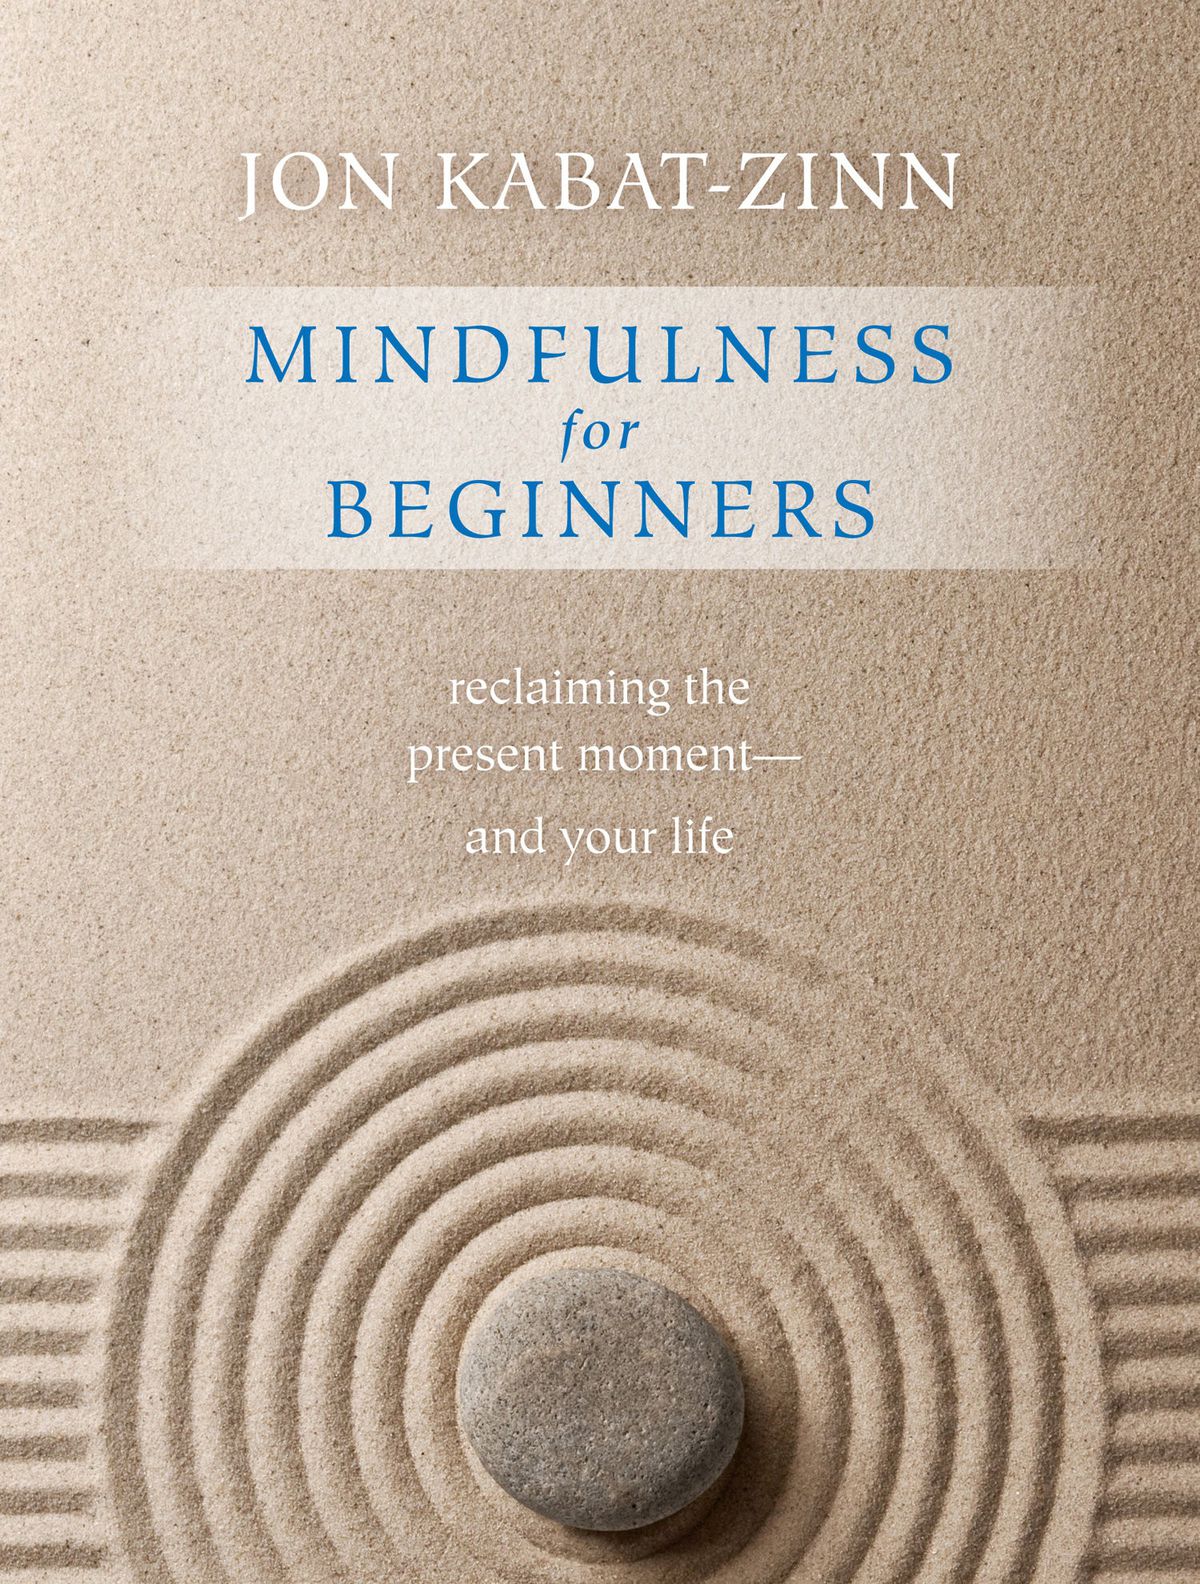 Mindfulness for Beginners: Reclaiming the Present Moment and Your Life